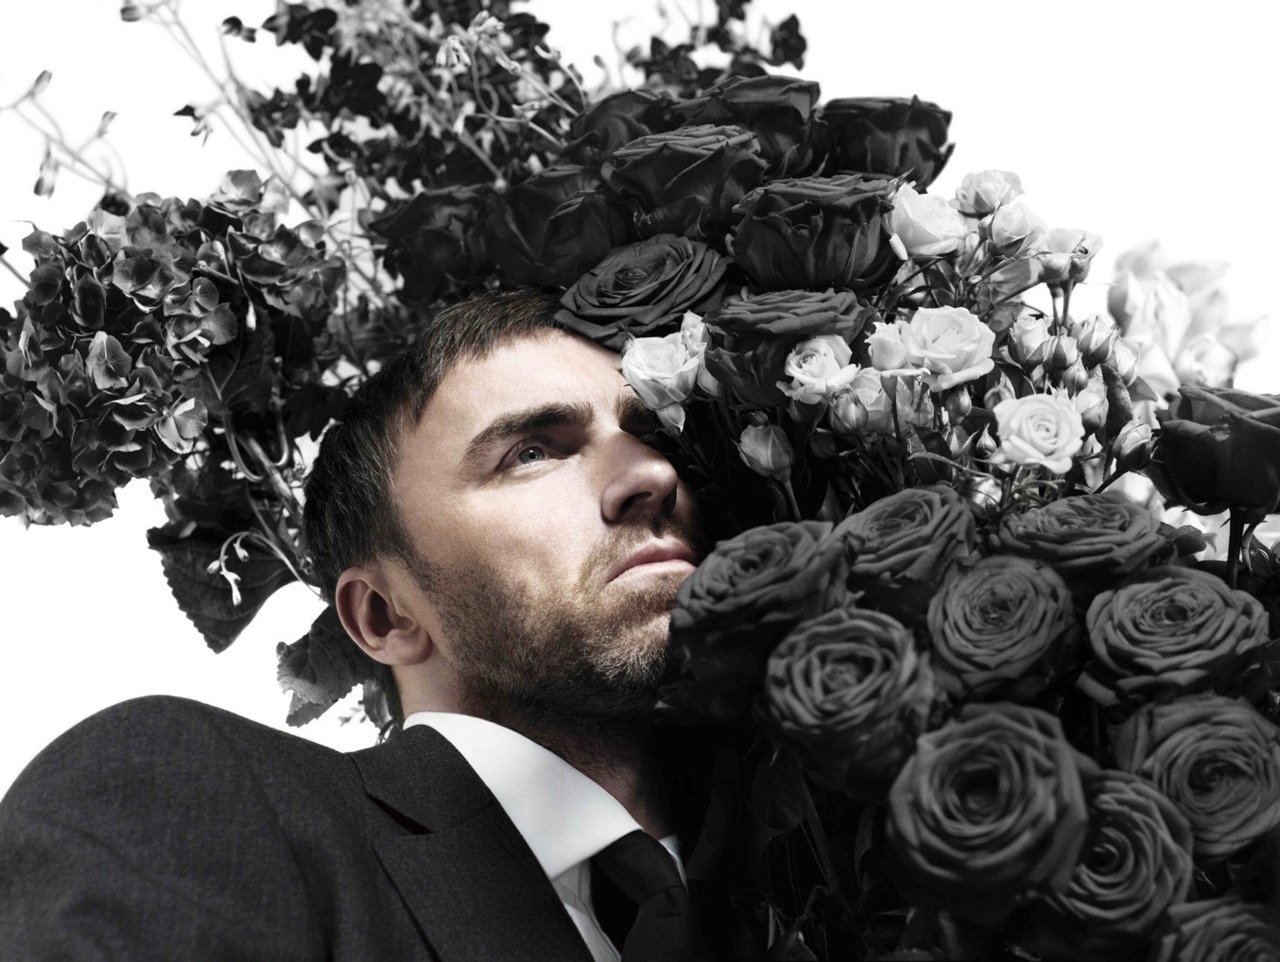 raf simons in a suit next to black roses